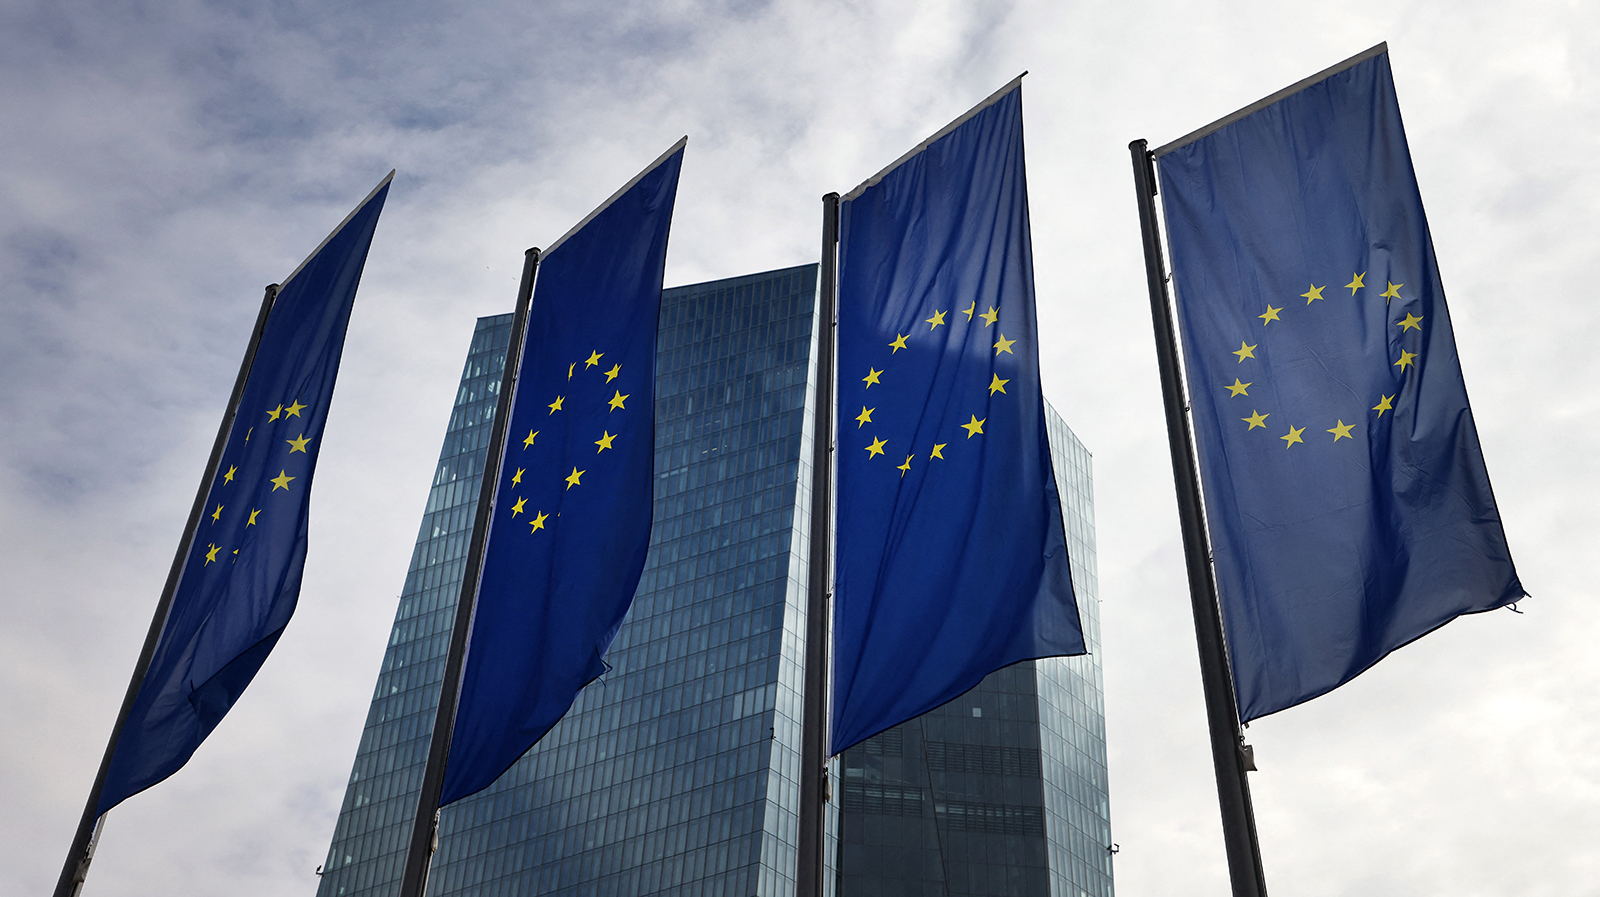 The European Central Bank is pictured behind EU flags in Frankfurt am Main, western Germany, on March 16.